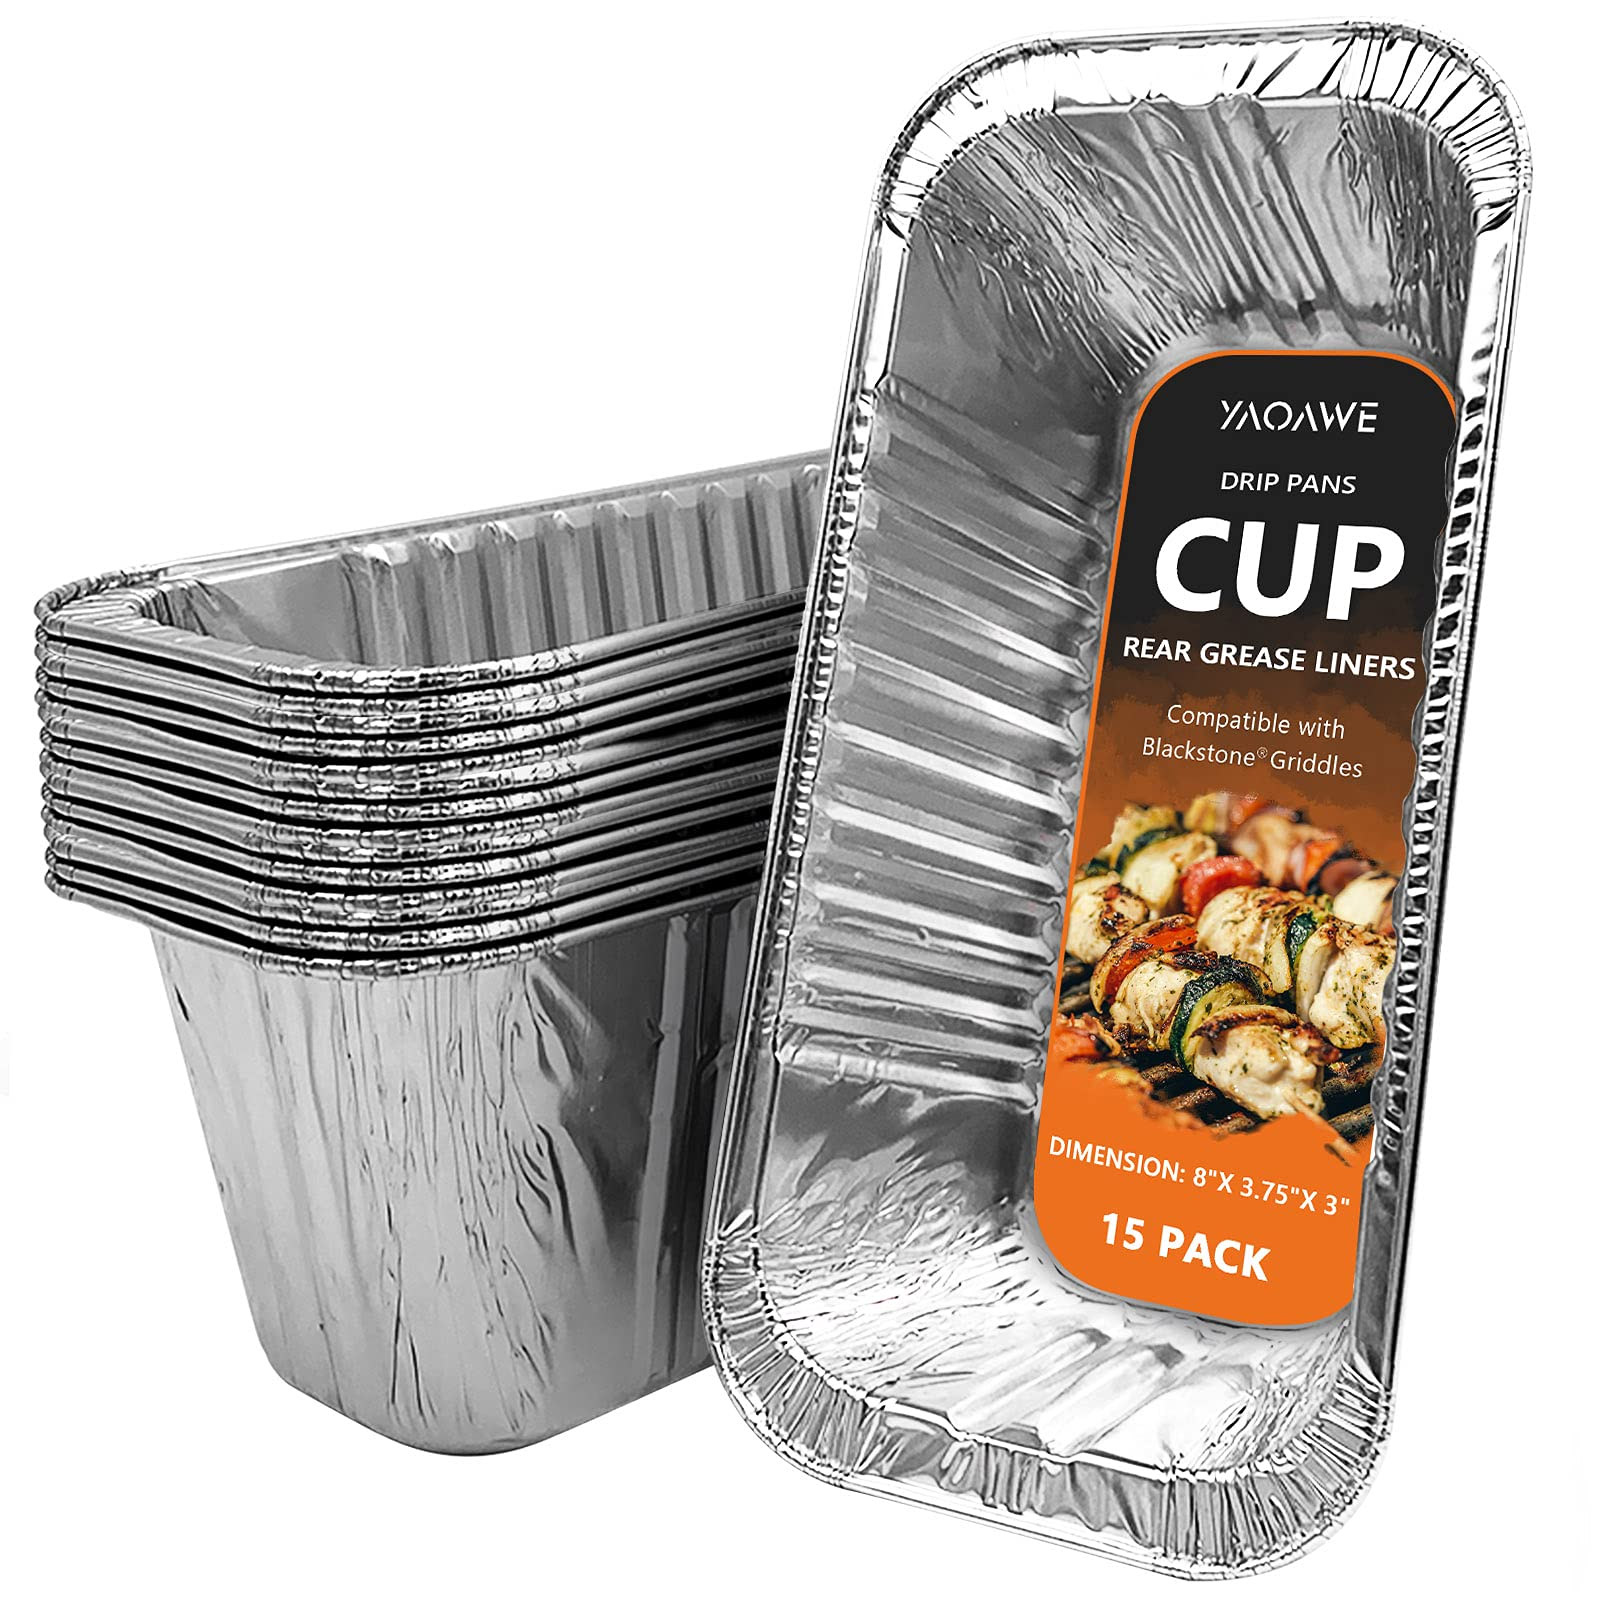 20 Pcs Aluminium Foil Trays Large Foil Food Trays with Lids Foil Baking Trays Takeaway Tin Containers for Oven Roasting Broiling Cooking